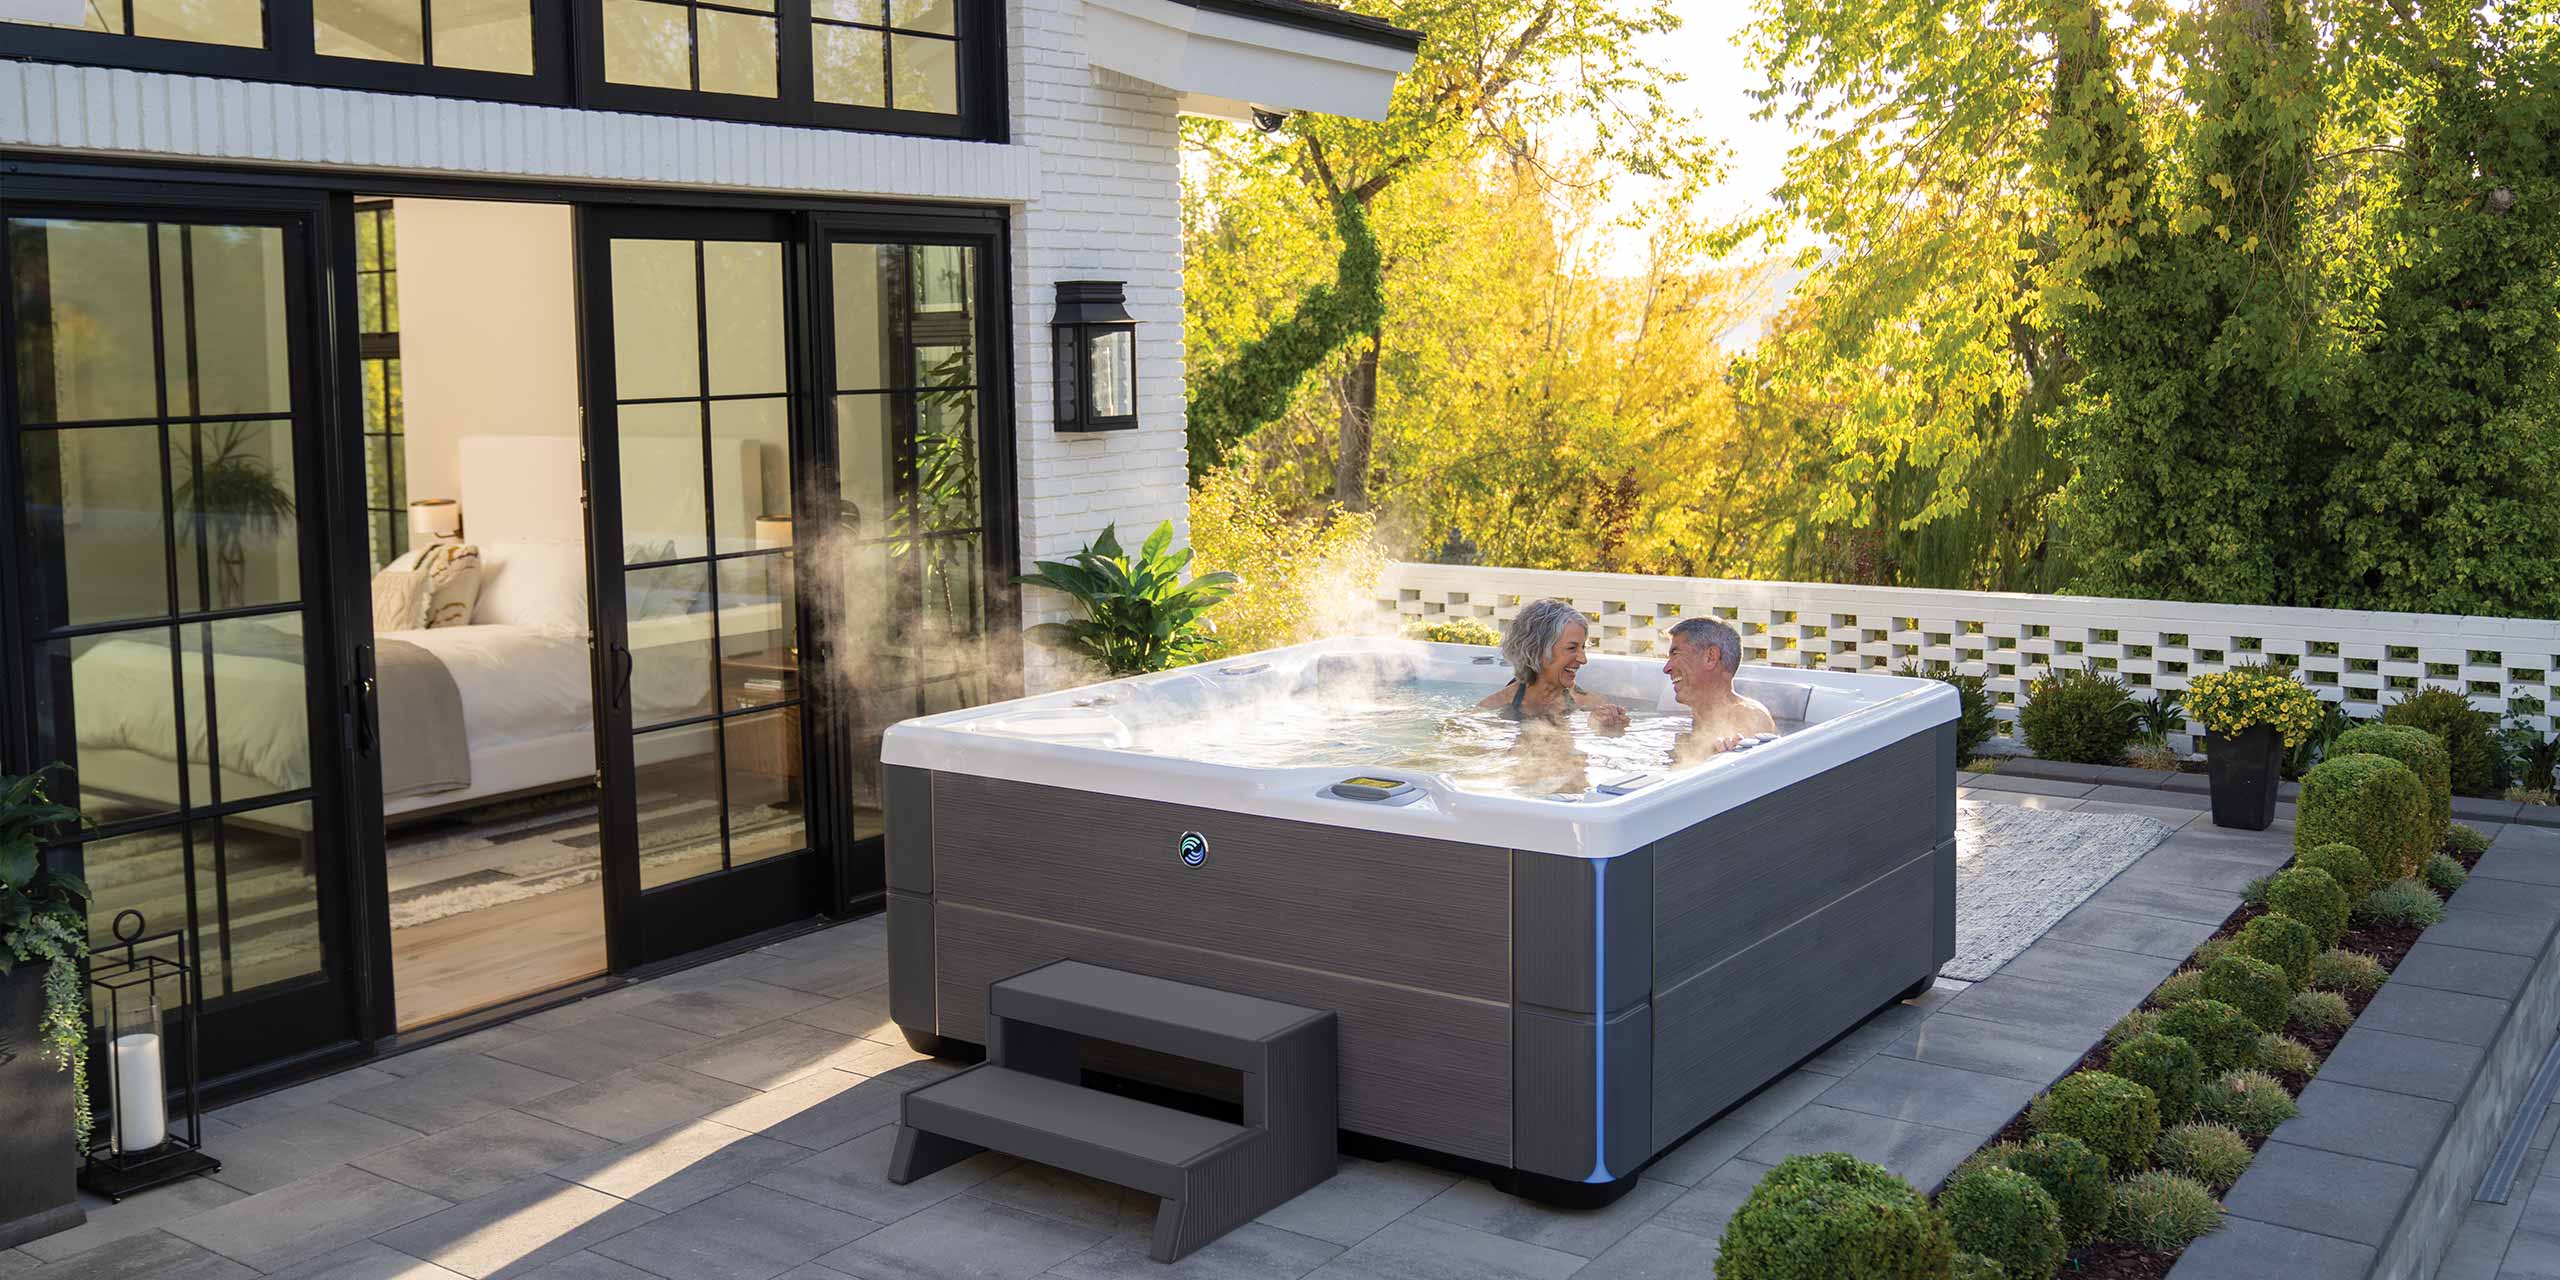 couple in a hot tub on their patio